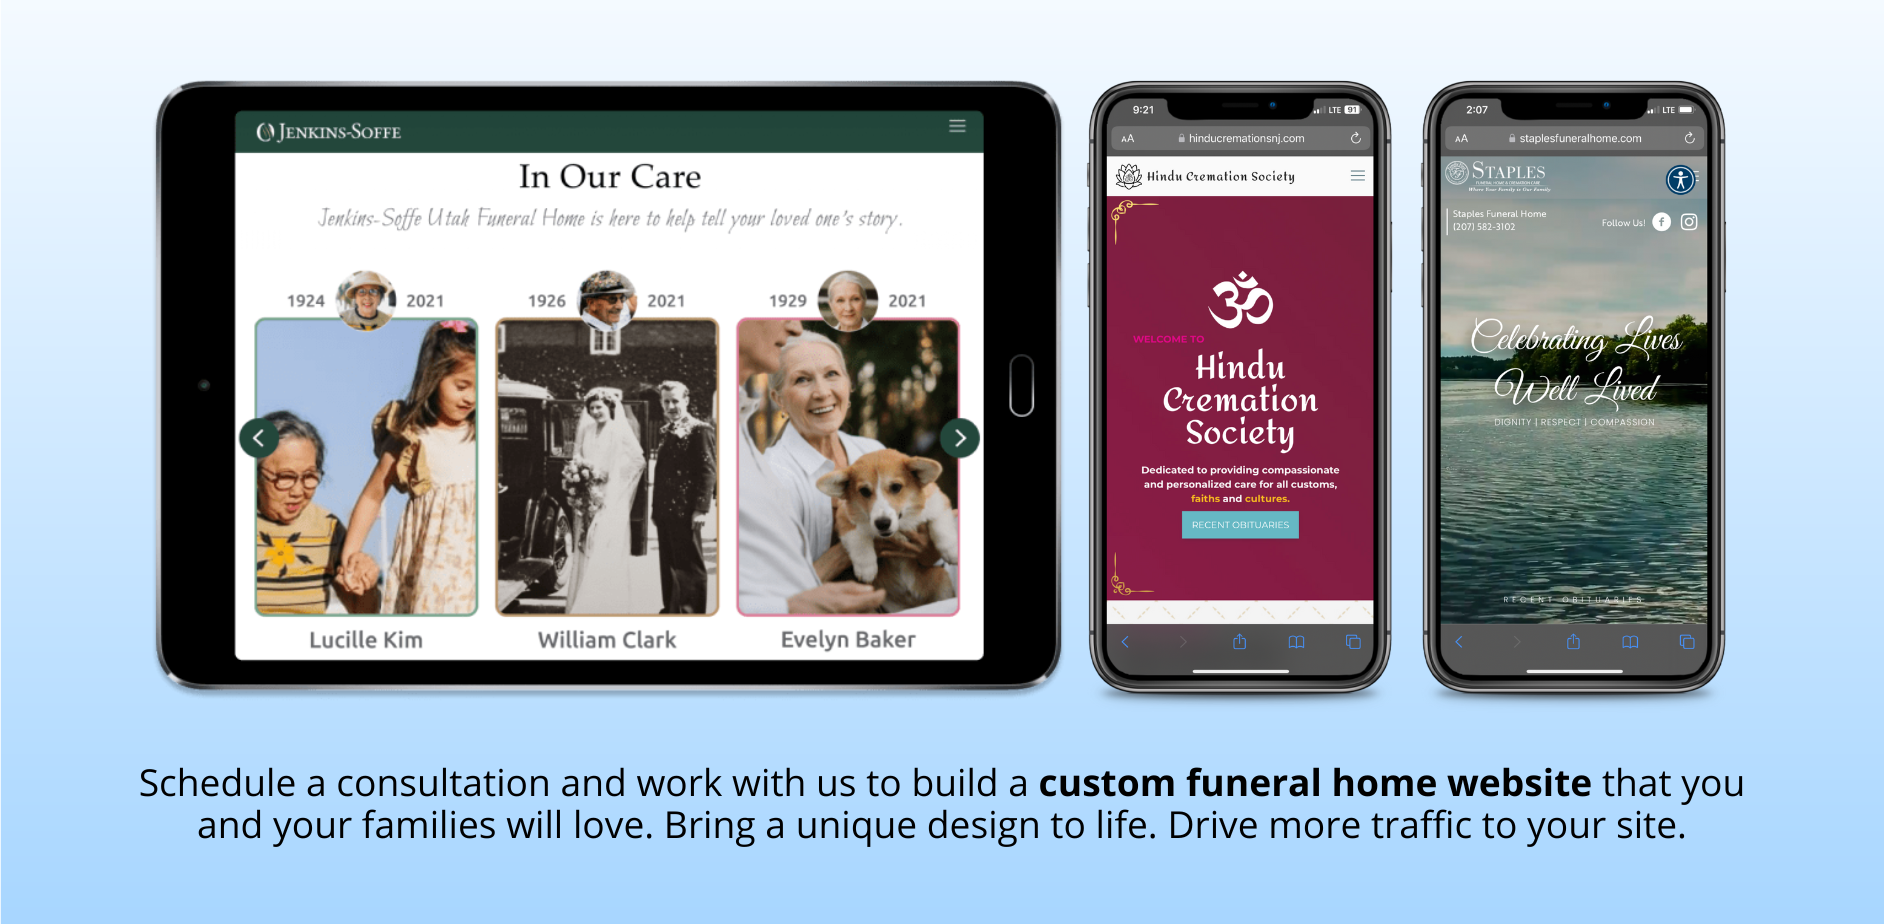 Build a one-of-a-kind website with our experienced in-house team that helps your funeral home standout. Mobile-friendly websites. SEO-friendly websites. Publish new obits in one click. Receive ongoing, unlimited website support.